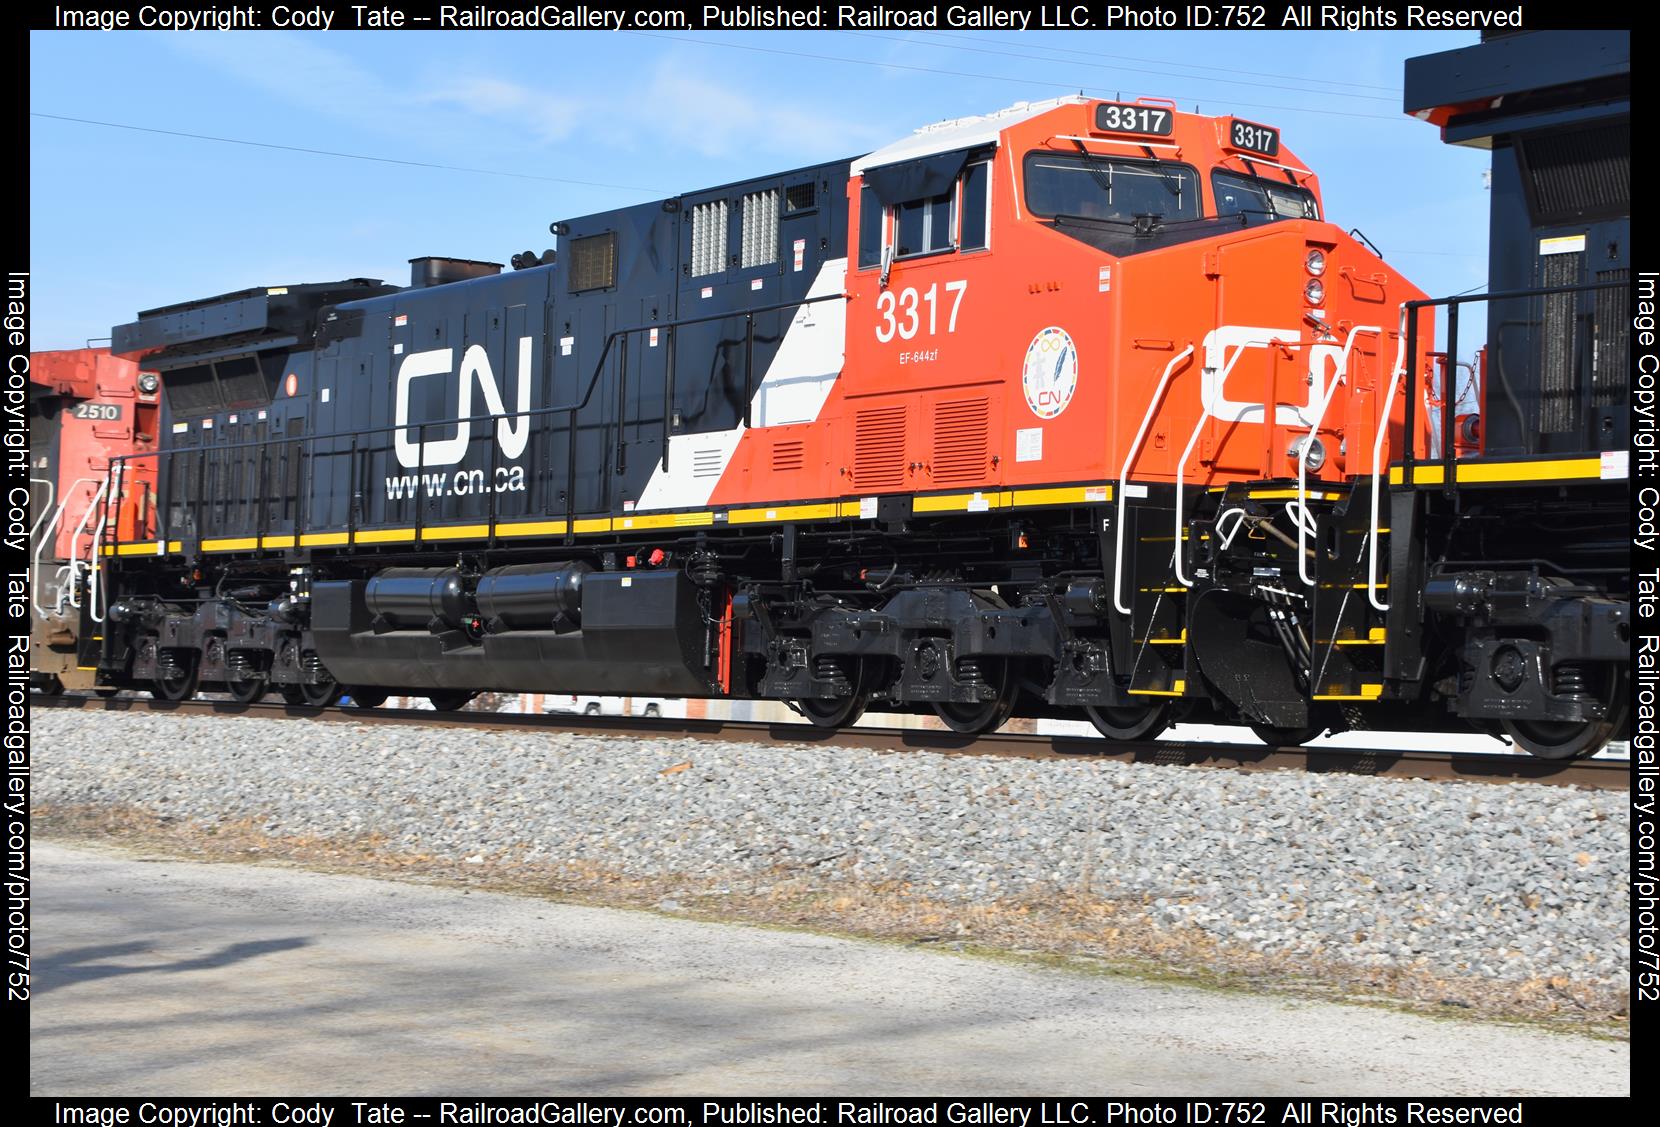 CN 3317 is a class AC44C6M  and  is pictured in Ashley IL , Illinois, USA.  This was taken along the Centralia subdivision  on the Canadian National Railway. Photo Copyright: Cody  Tate uploaded to Railroad Gallery on 02/25/2023. This photograph of CN 3317 was taken on Saturday, February 25, 2023. All Rights Reserved. 